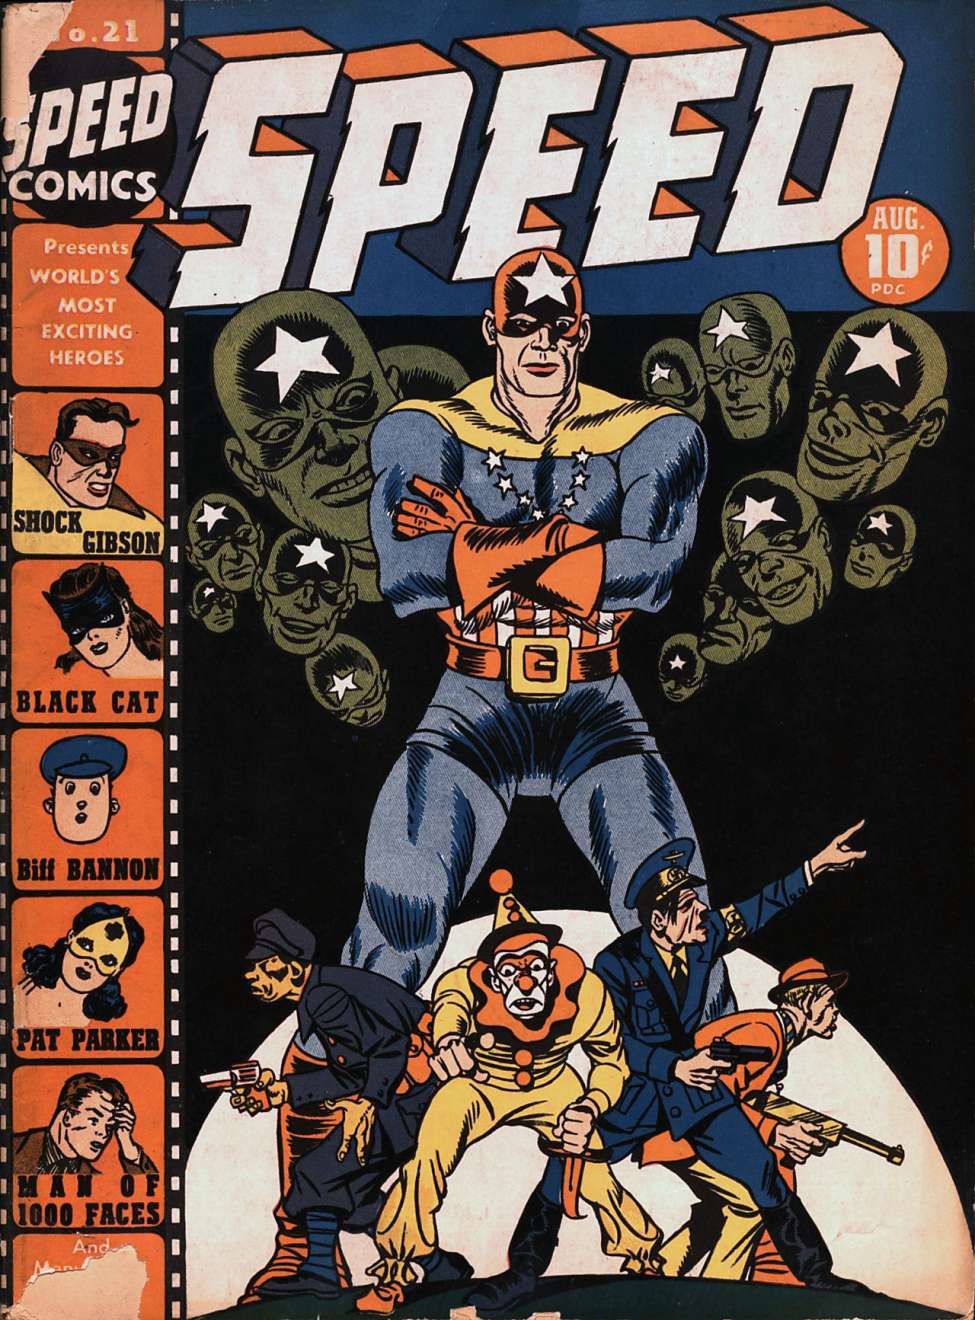 Book Cover For Speed Comics 21